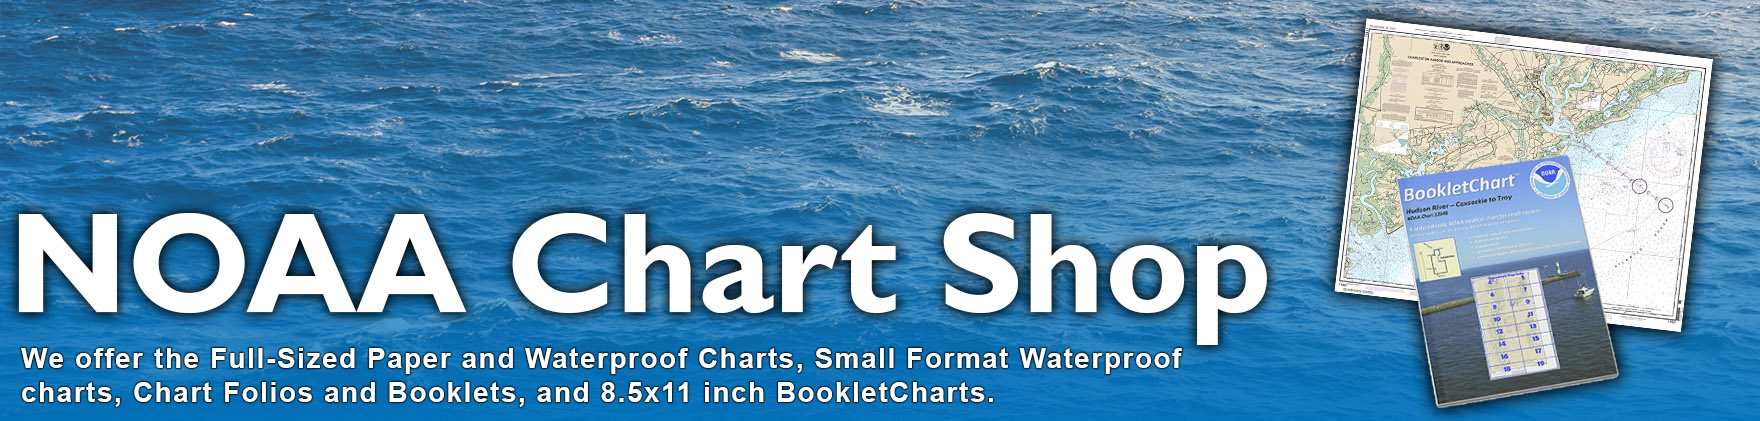 Paradise Cay Publications Small Format Waterproof NOAA Chart 13249: Provincetown Harbor 21.00 x 25.40 Inc